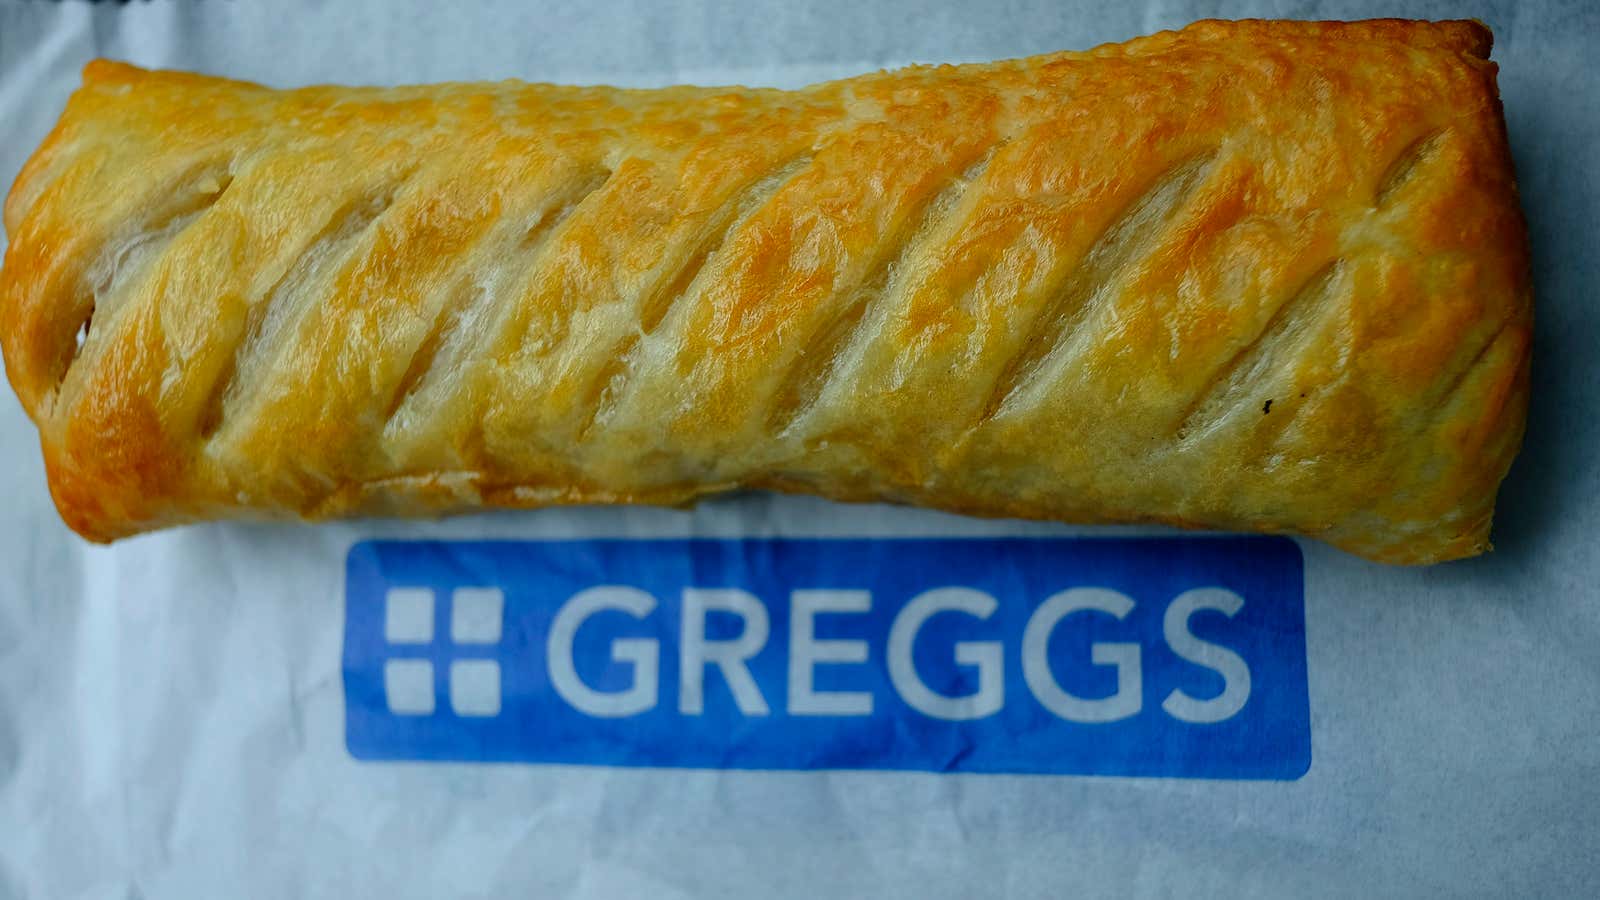 Greggs vegan sausage roll is a key revenue booster